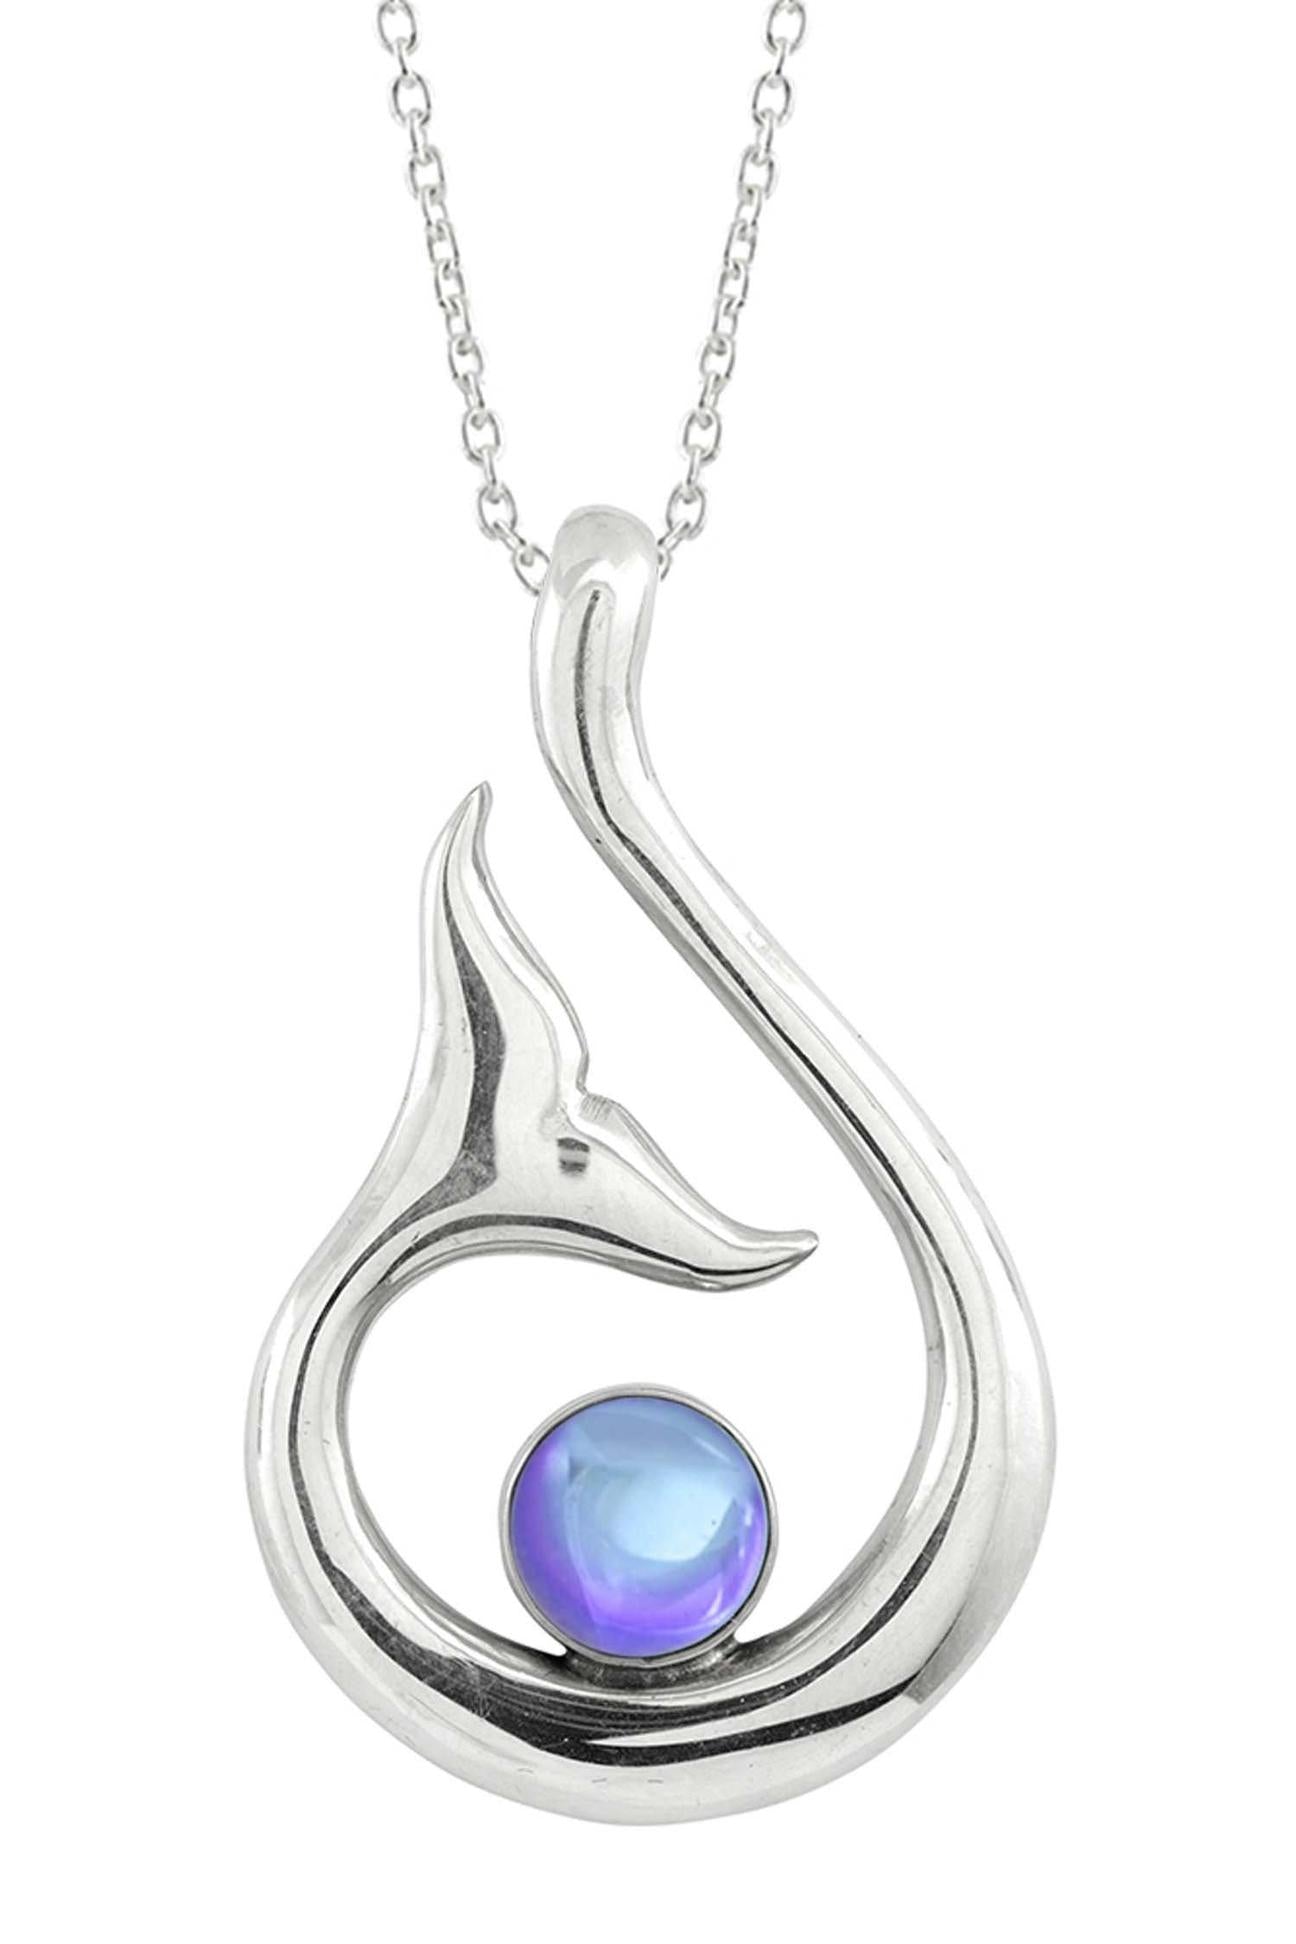 Leightworks Whale's Tale Crystal Pendant